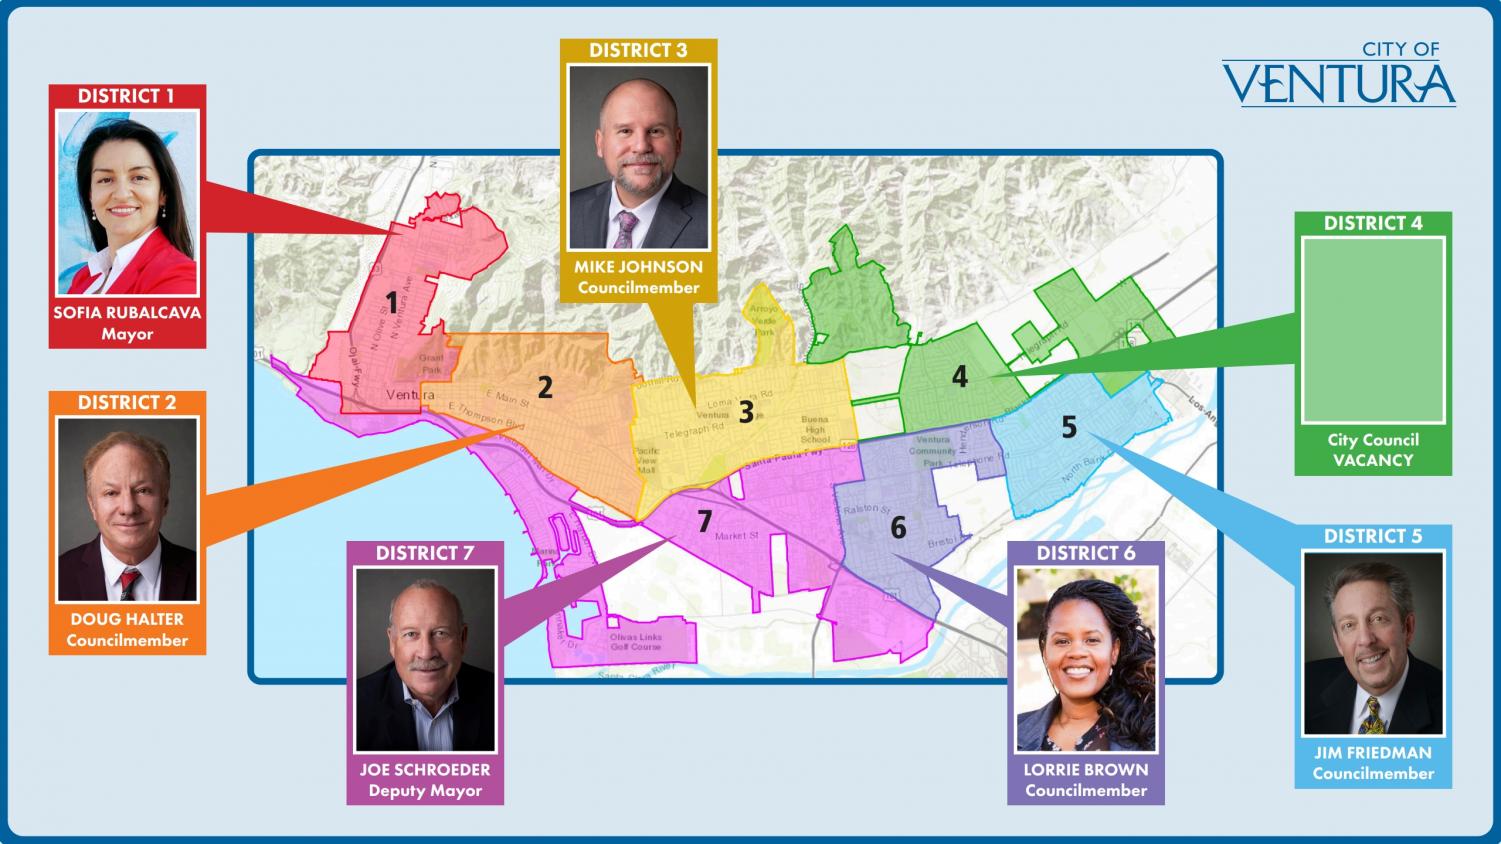 A district map of Ventura found on the City of Ventura's website.